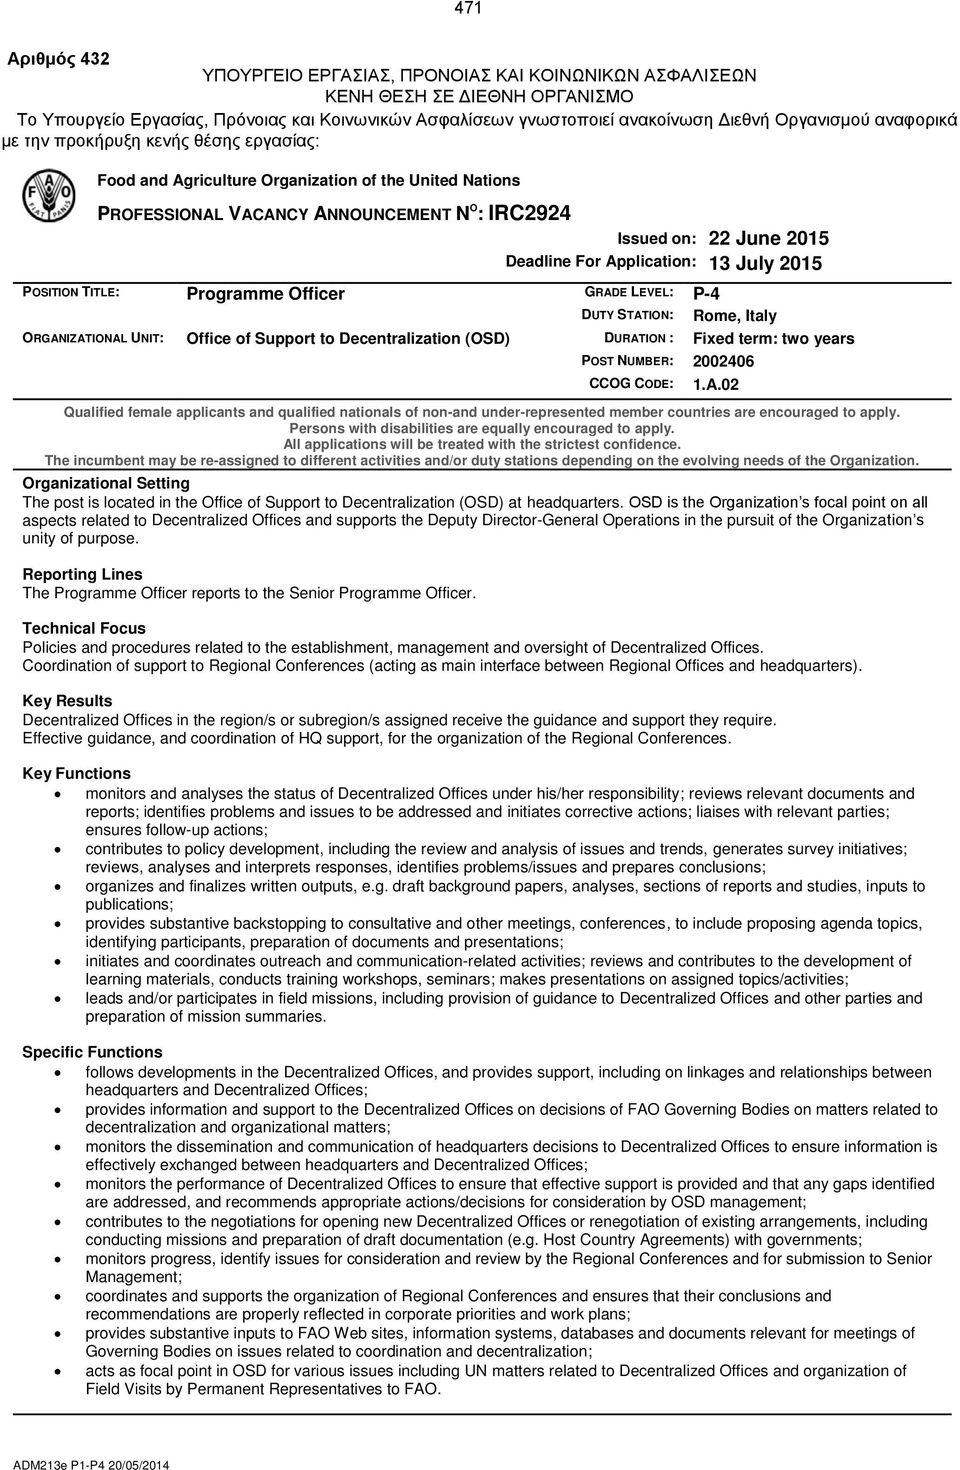 Application: 13 July 2015 POSITION TITLE: Programme Officer GRADE LEVEL: P-4 DUTY STATION: Rome, Italy ORGANIZATIONAL UNIT: Office of Support to Decentralization (OSD) DURATION : Fixed term: two